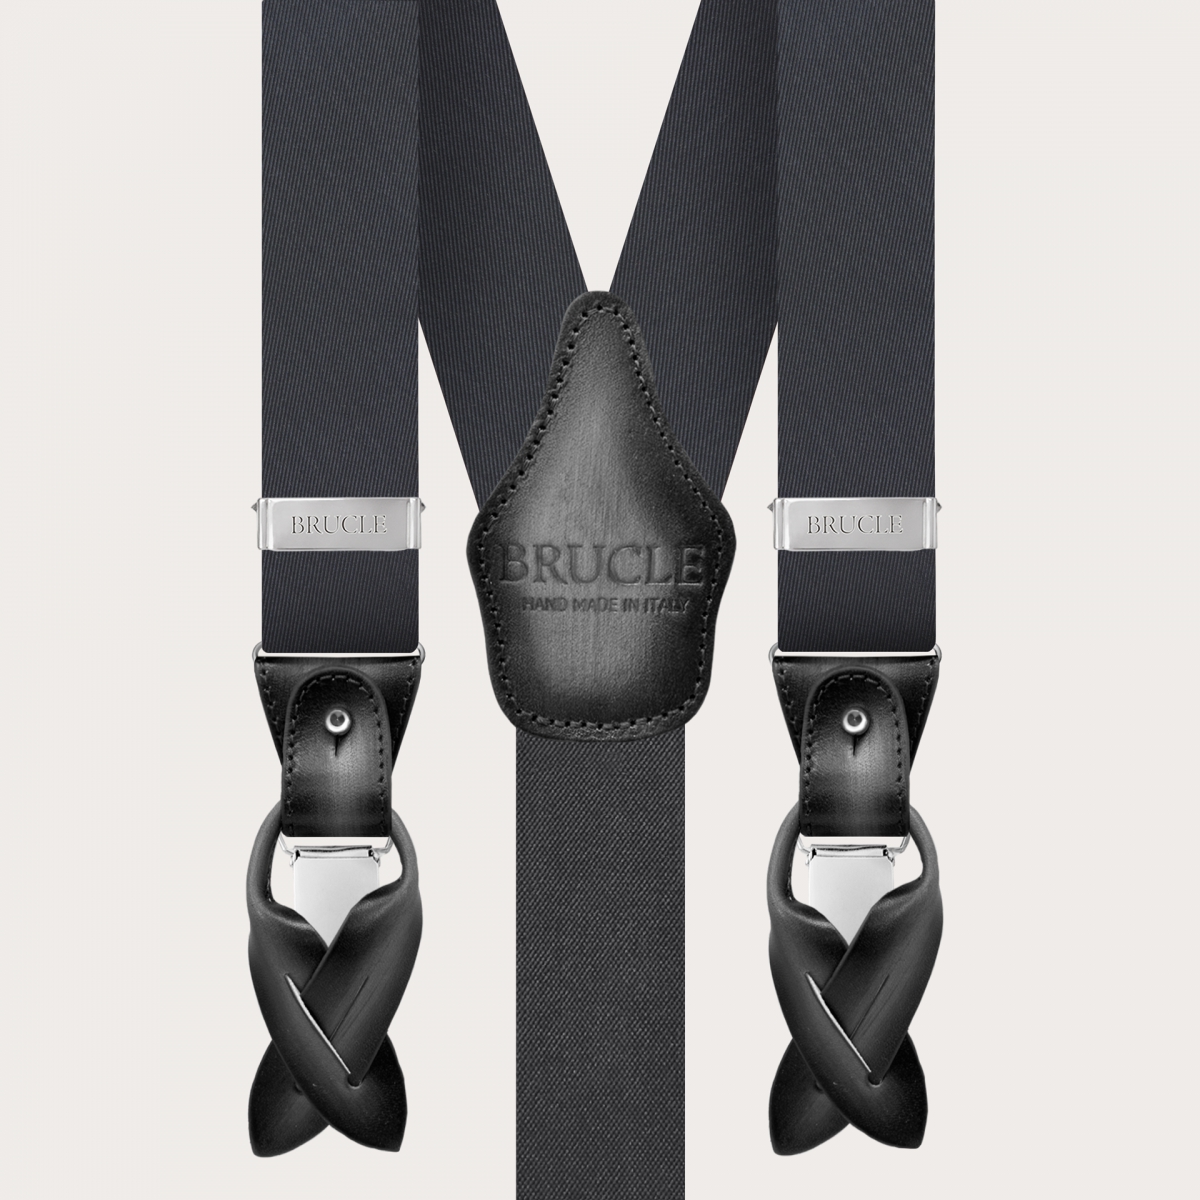 BRUCLE Suspenders and bow tie set in charcoal grey silk